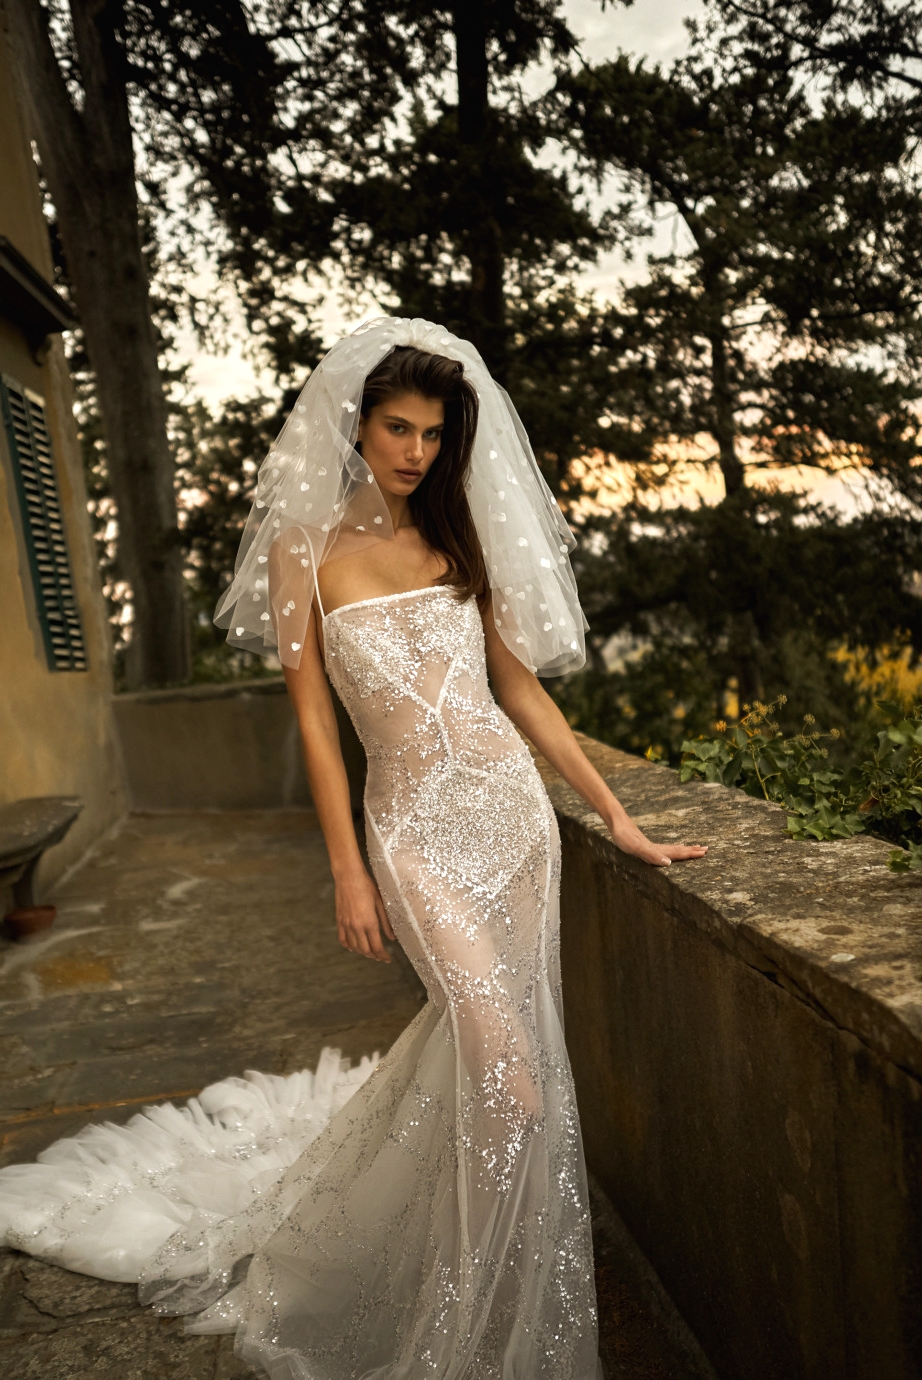 What A Bombshell! Sheer and Illusion Wedding Dresses | 